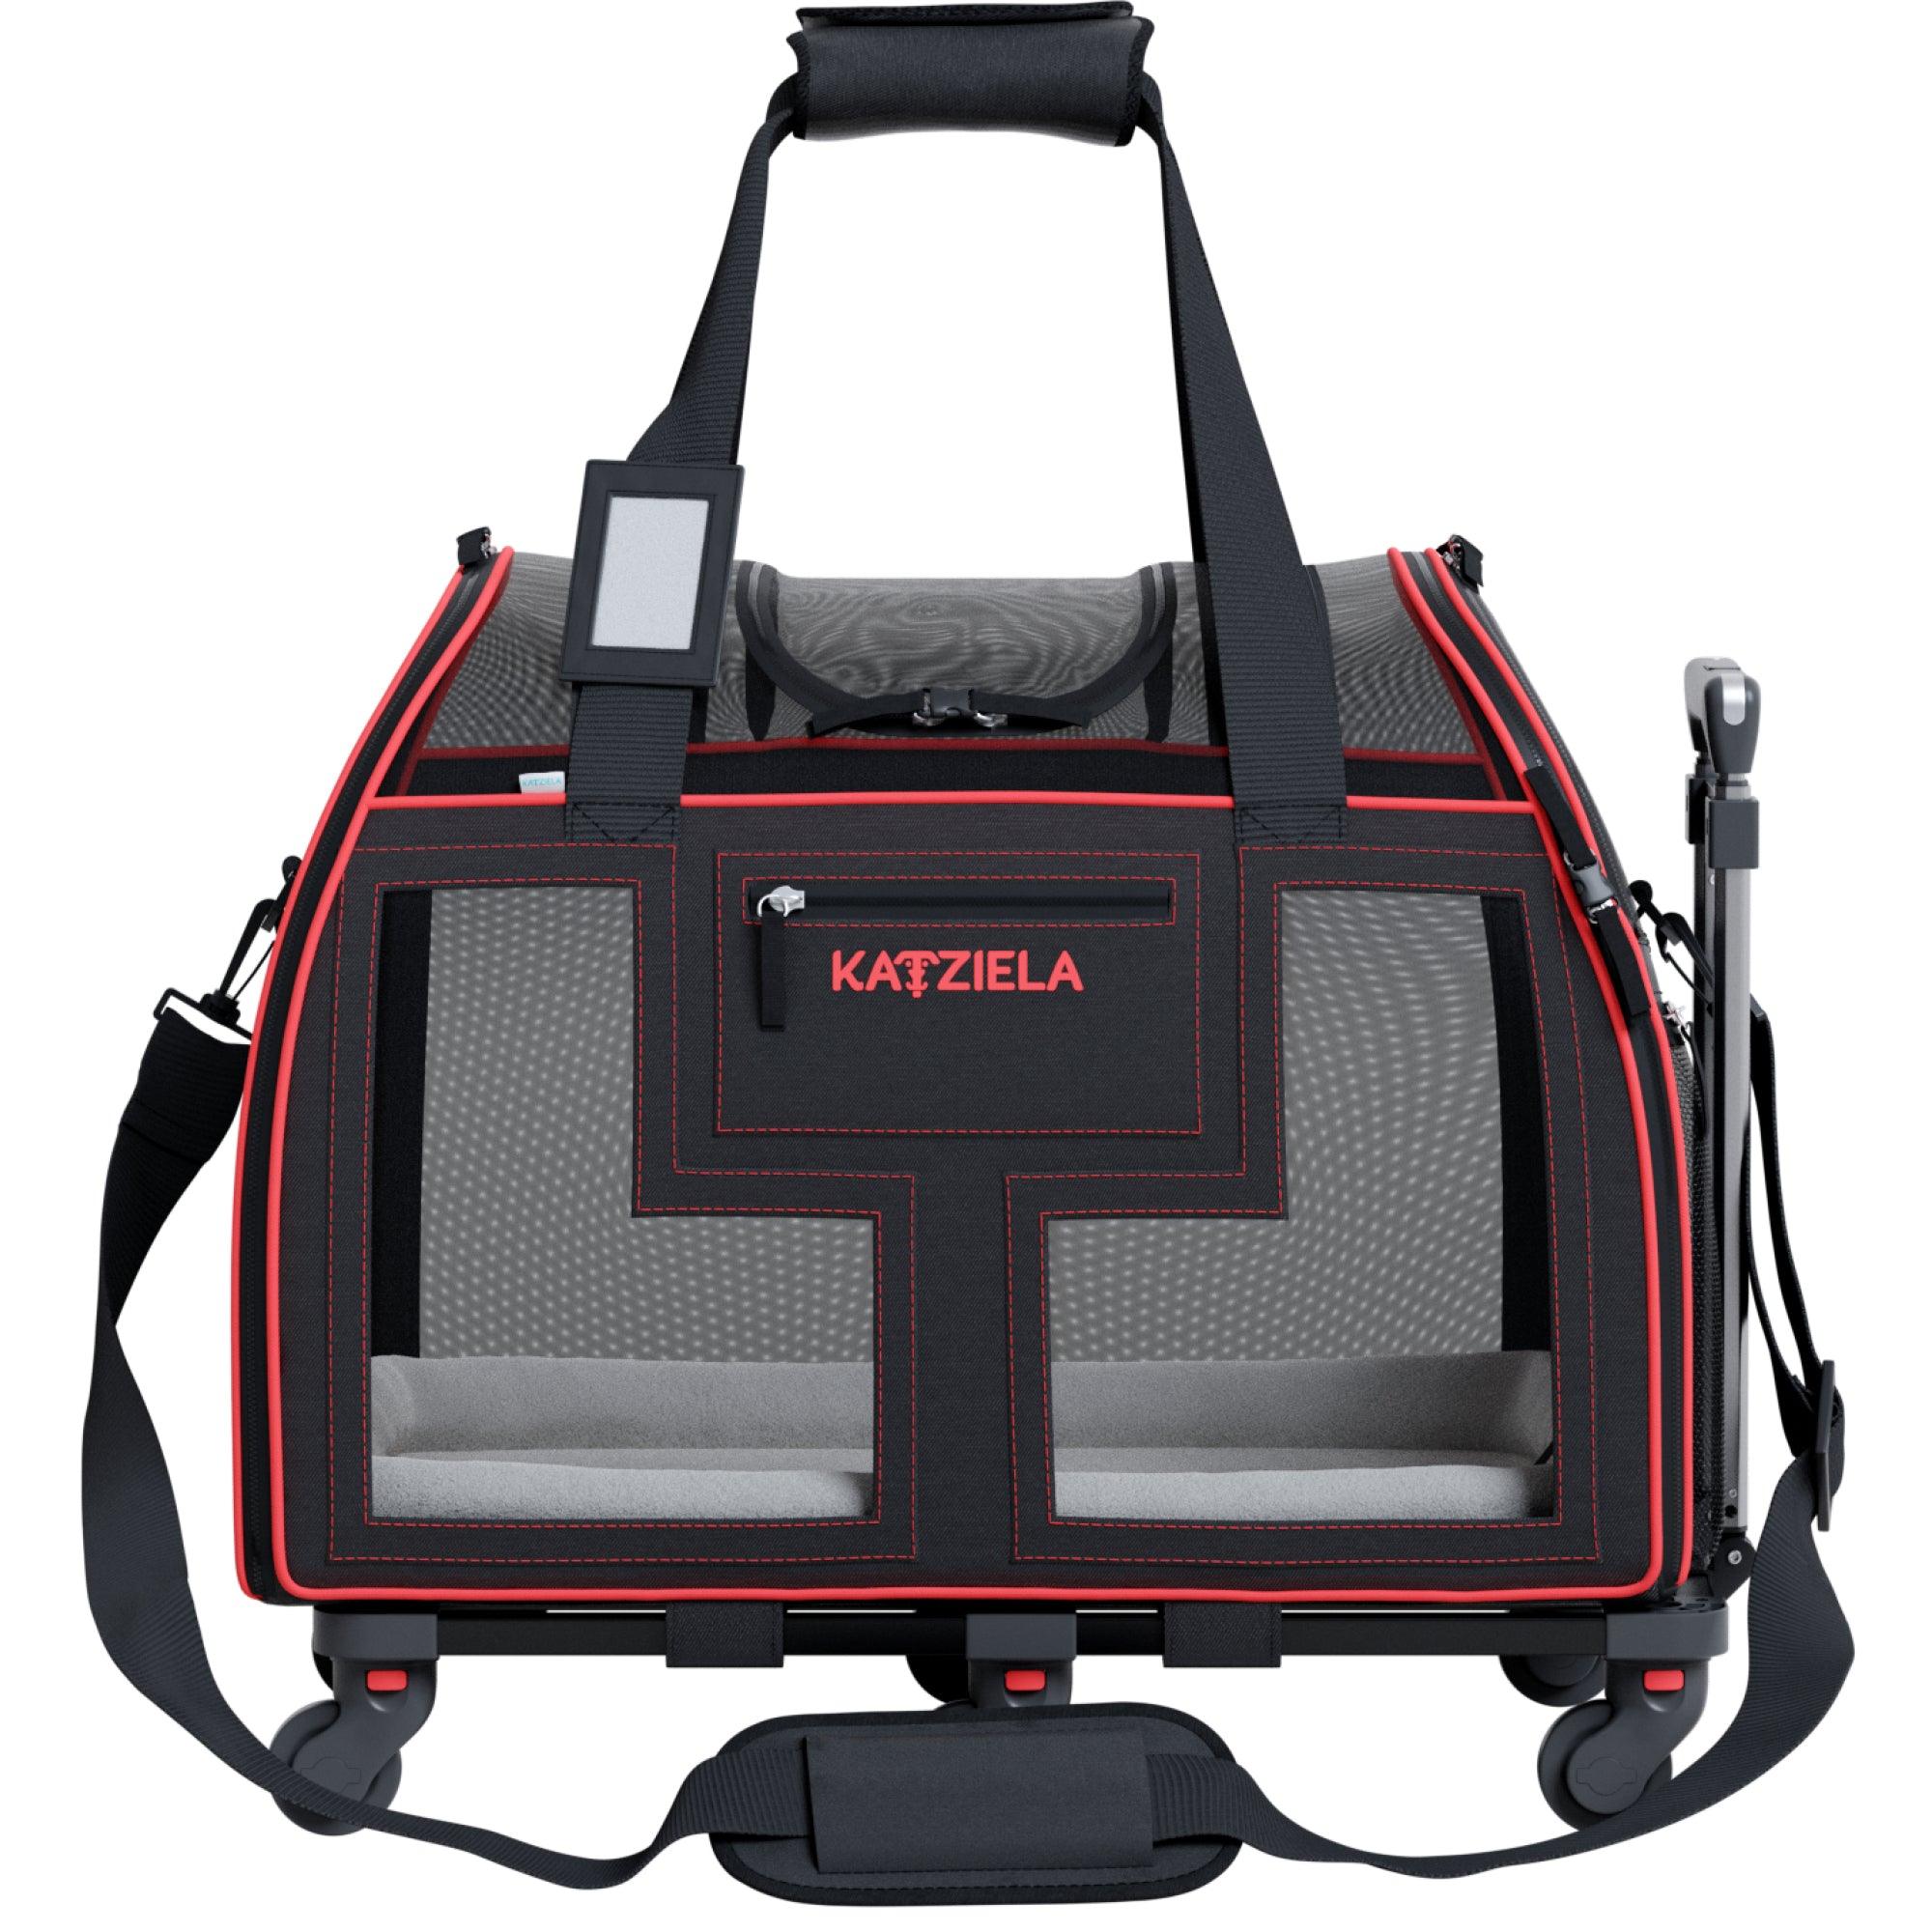 Luxury Lorry™ Pet Carrier with Removable Wheels and Telescopic Handle - Katziela